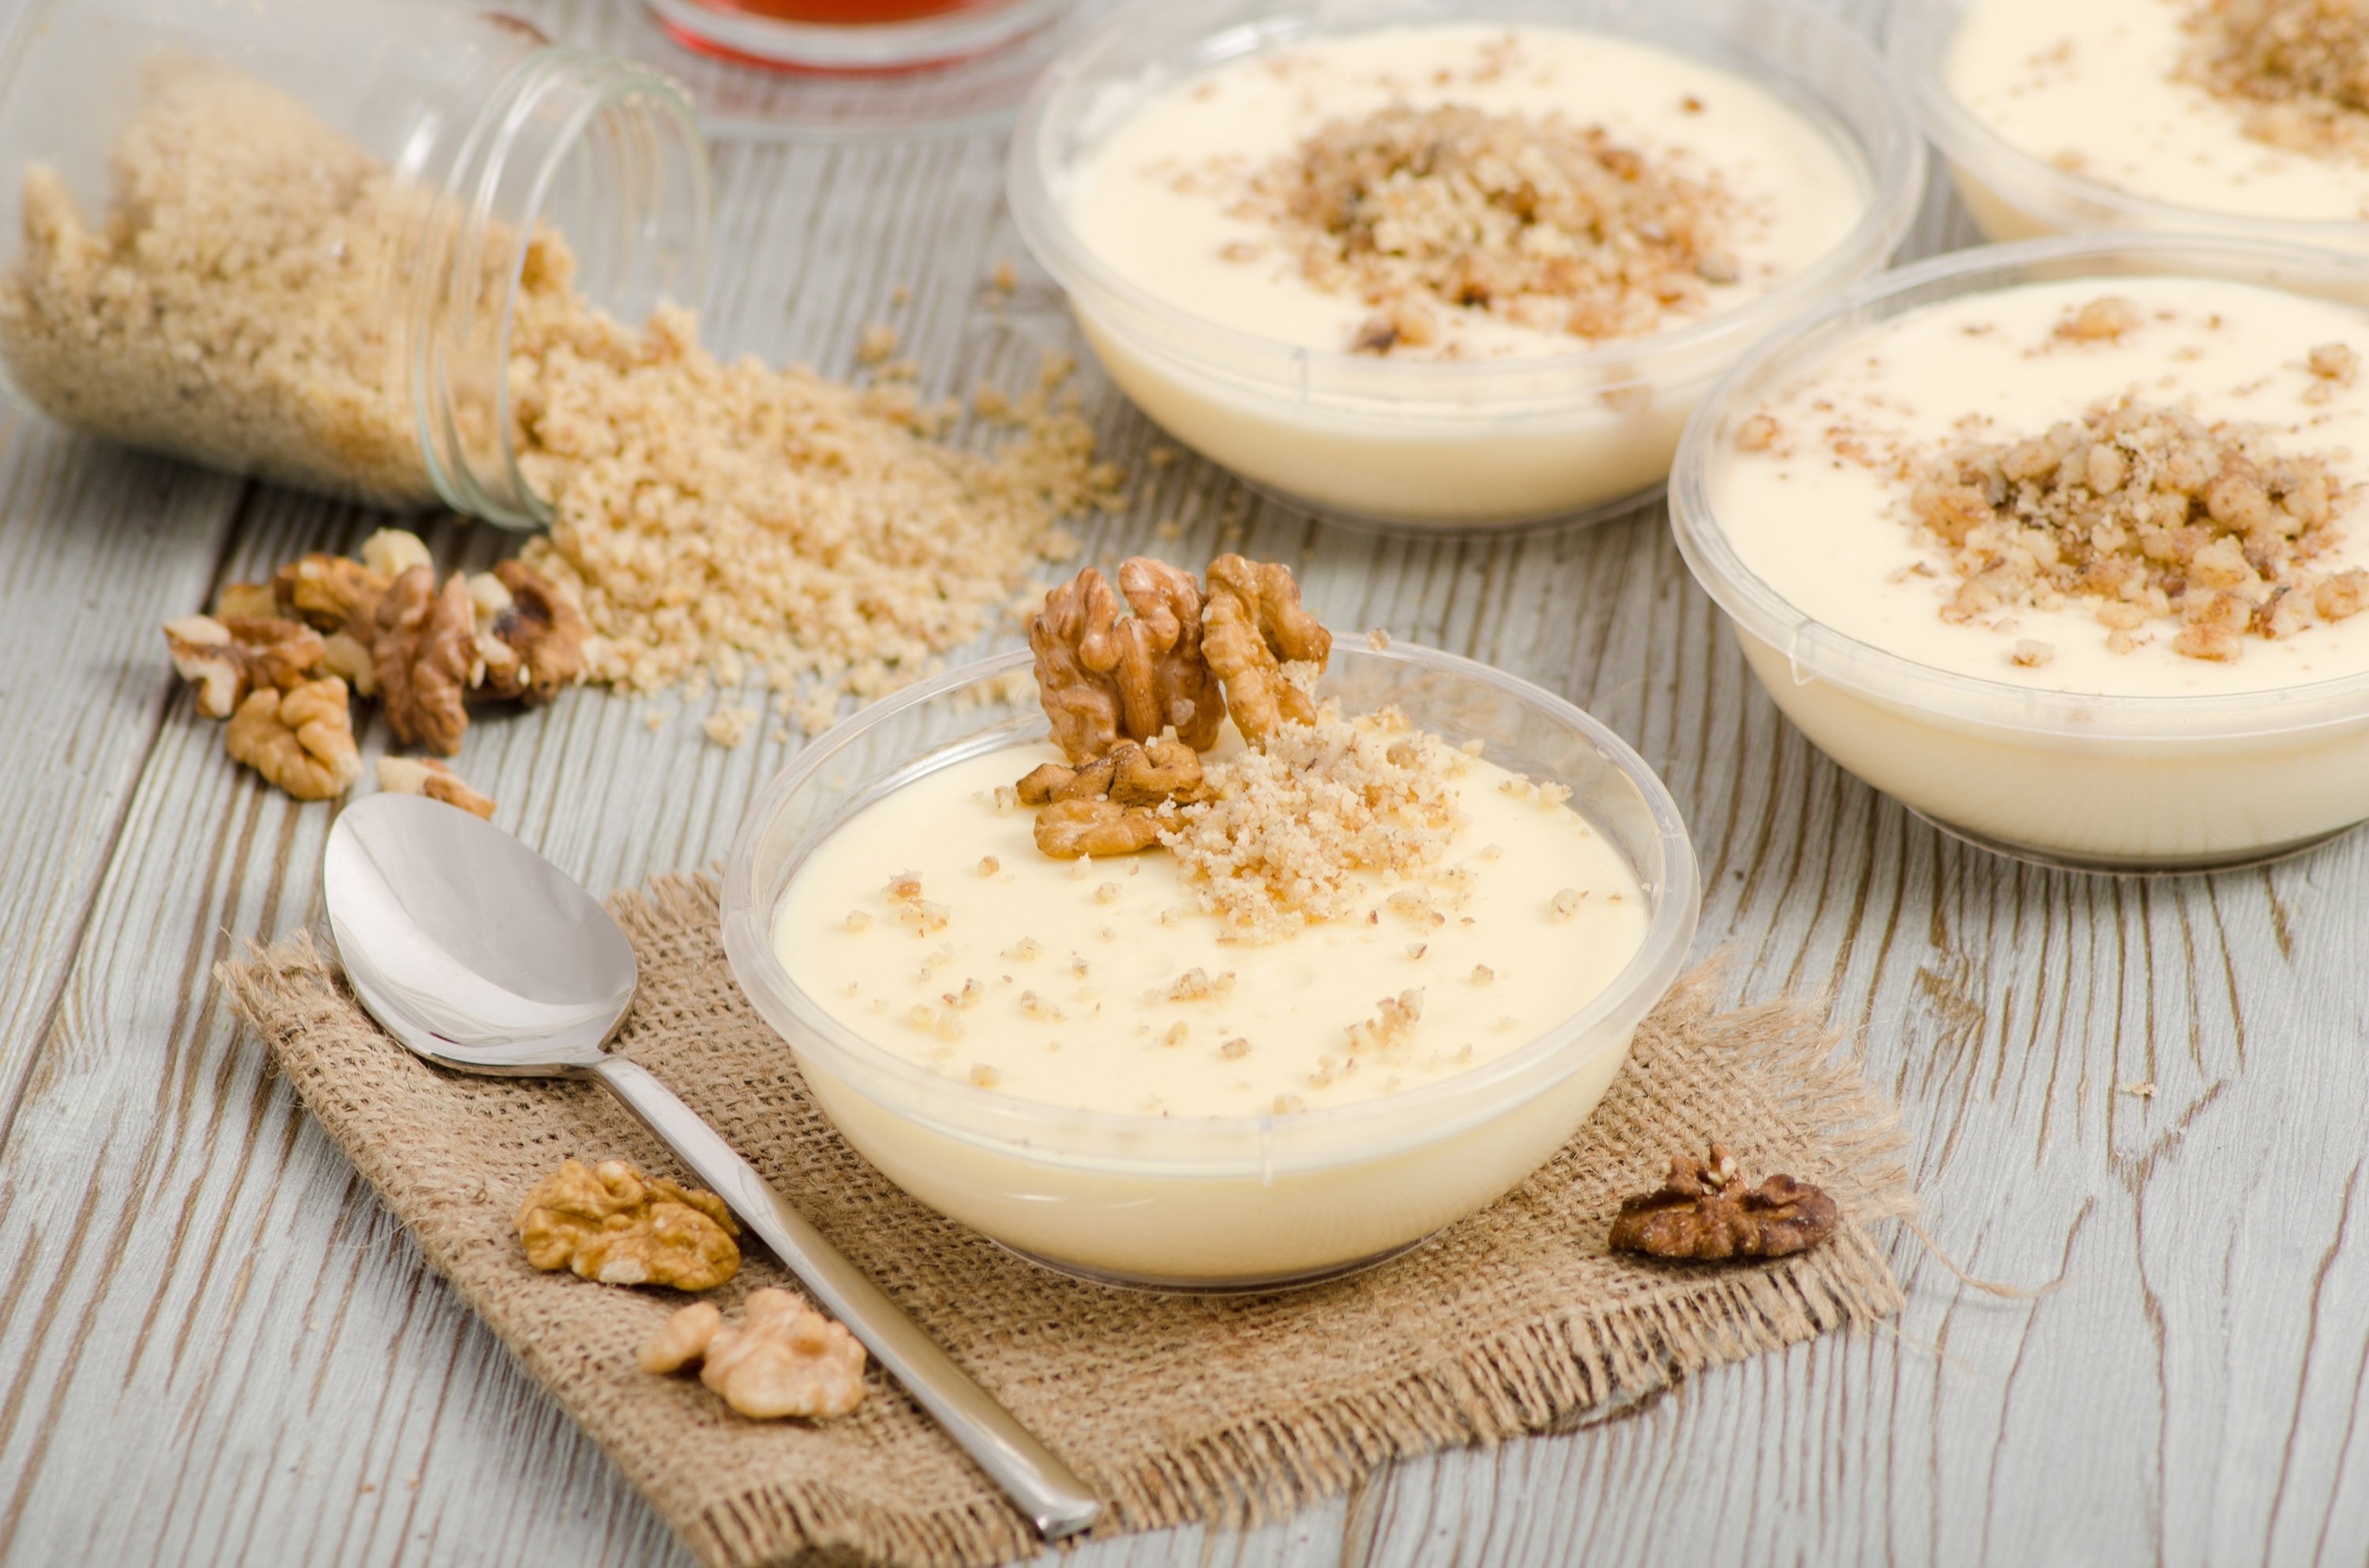 Top off your keşkül with some crushed nuts for added texture. (Shutterstock Photo)